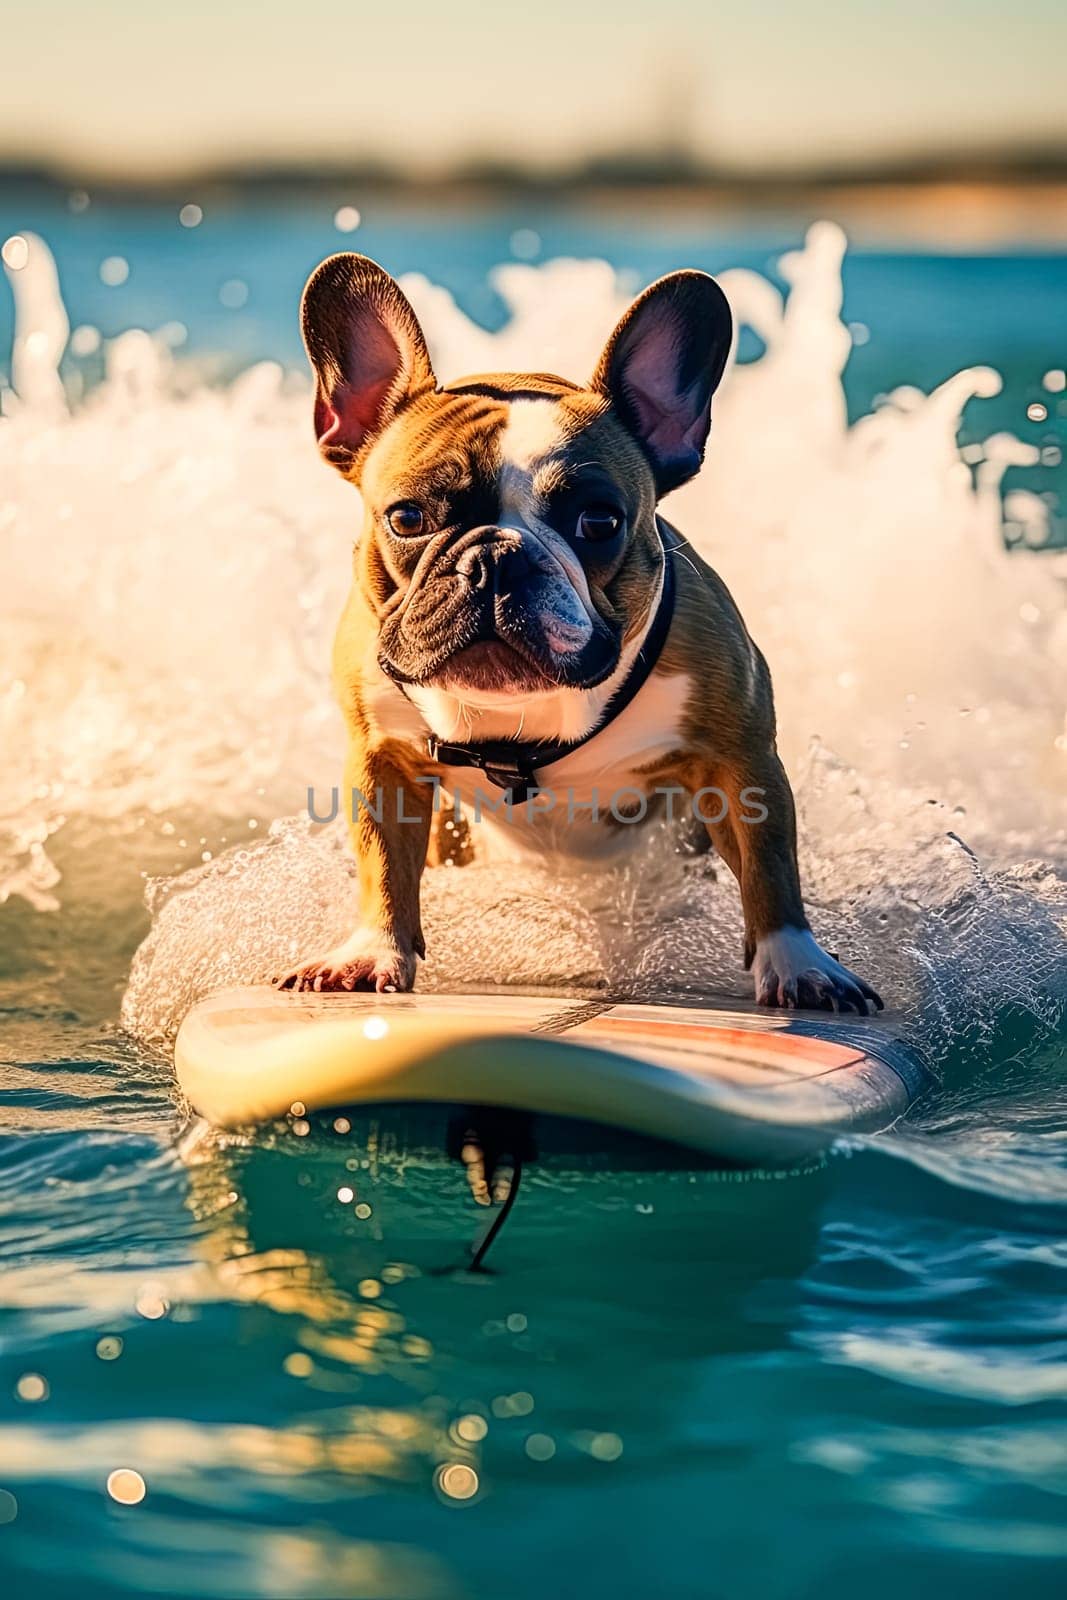 A dog is surfing on a surfboard in the ocean. The dog is wearing a harness and he is enjoying the ride. The image has a playful and fun mood, as it shows a dog engaging in a human activity